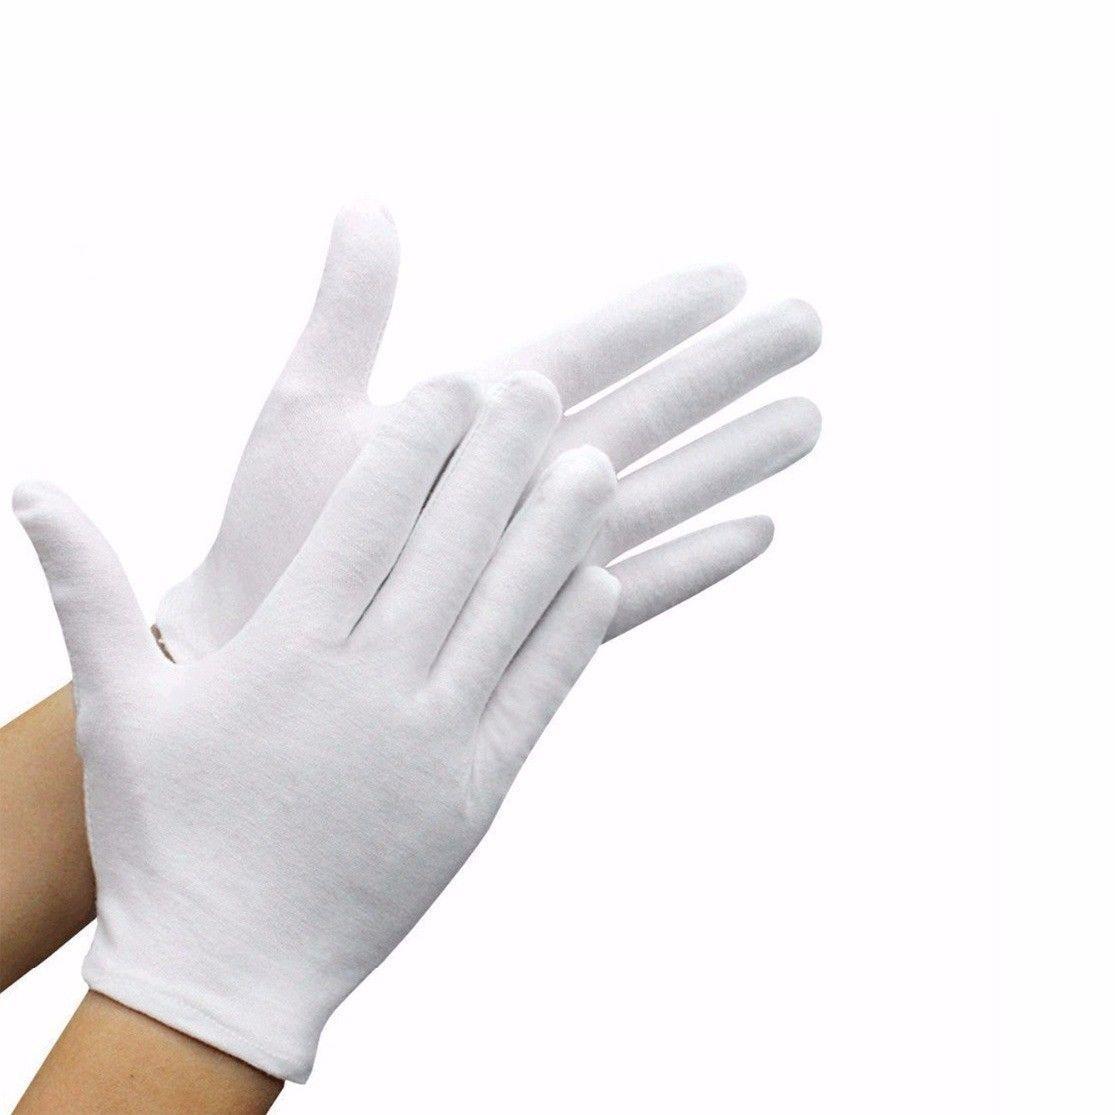 Heavy Duty Cotton Working Gloves One Size White 2297 (Large Letter Rate)